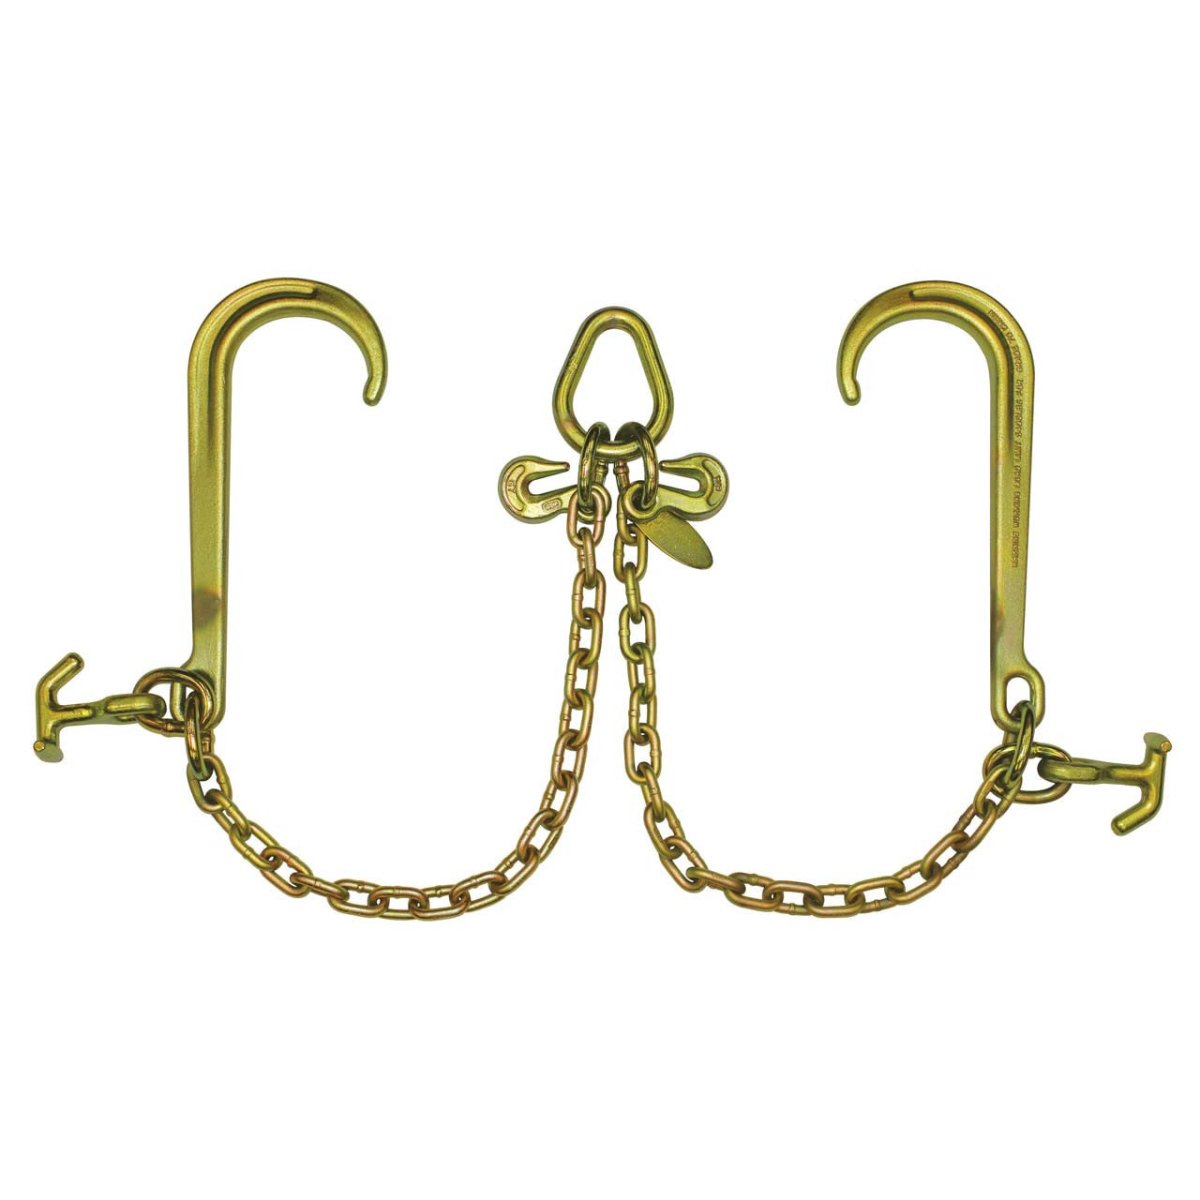 B/A Products Co. 5/16" x 2' Grade 70 Hammerhead T-J Combo & 15" Classic Style J Hook V-Chain - Z11-8H - starequipmentsales